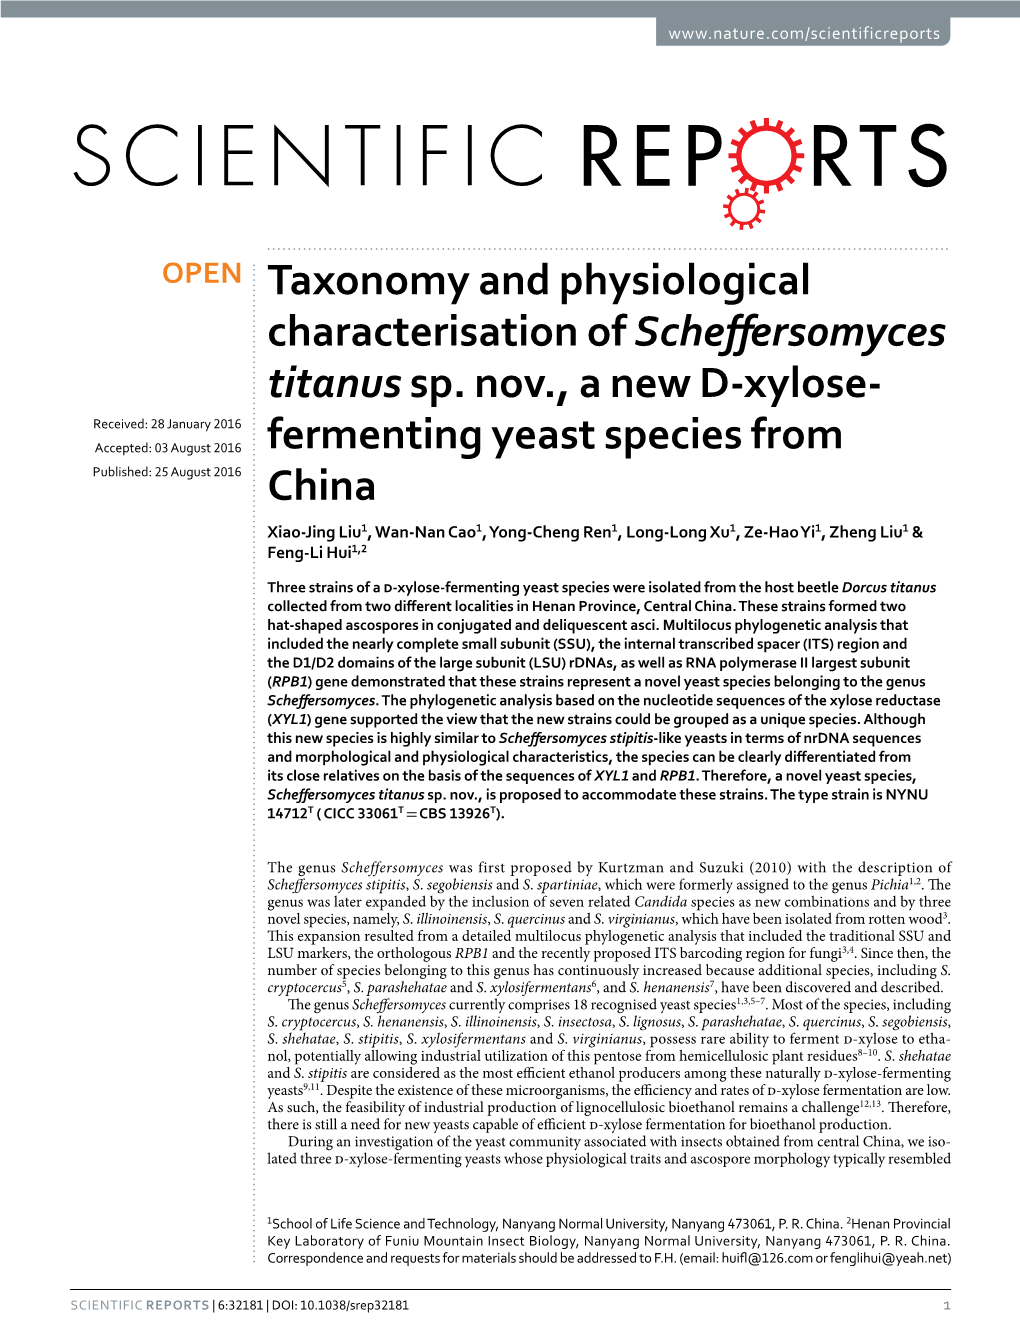 Taxonomy and Physiological Characterisation of Scheffersomyces Titanus Sp